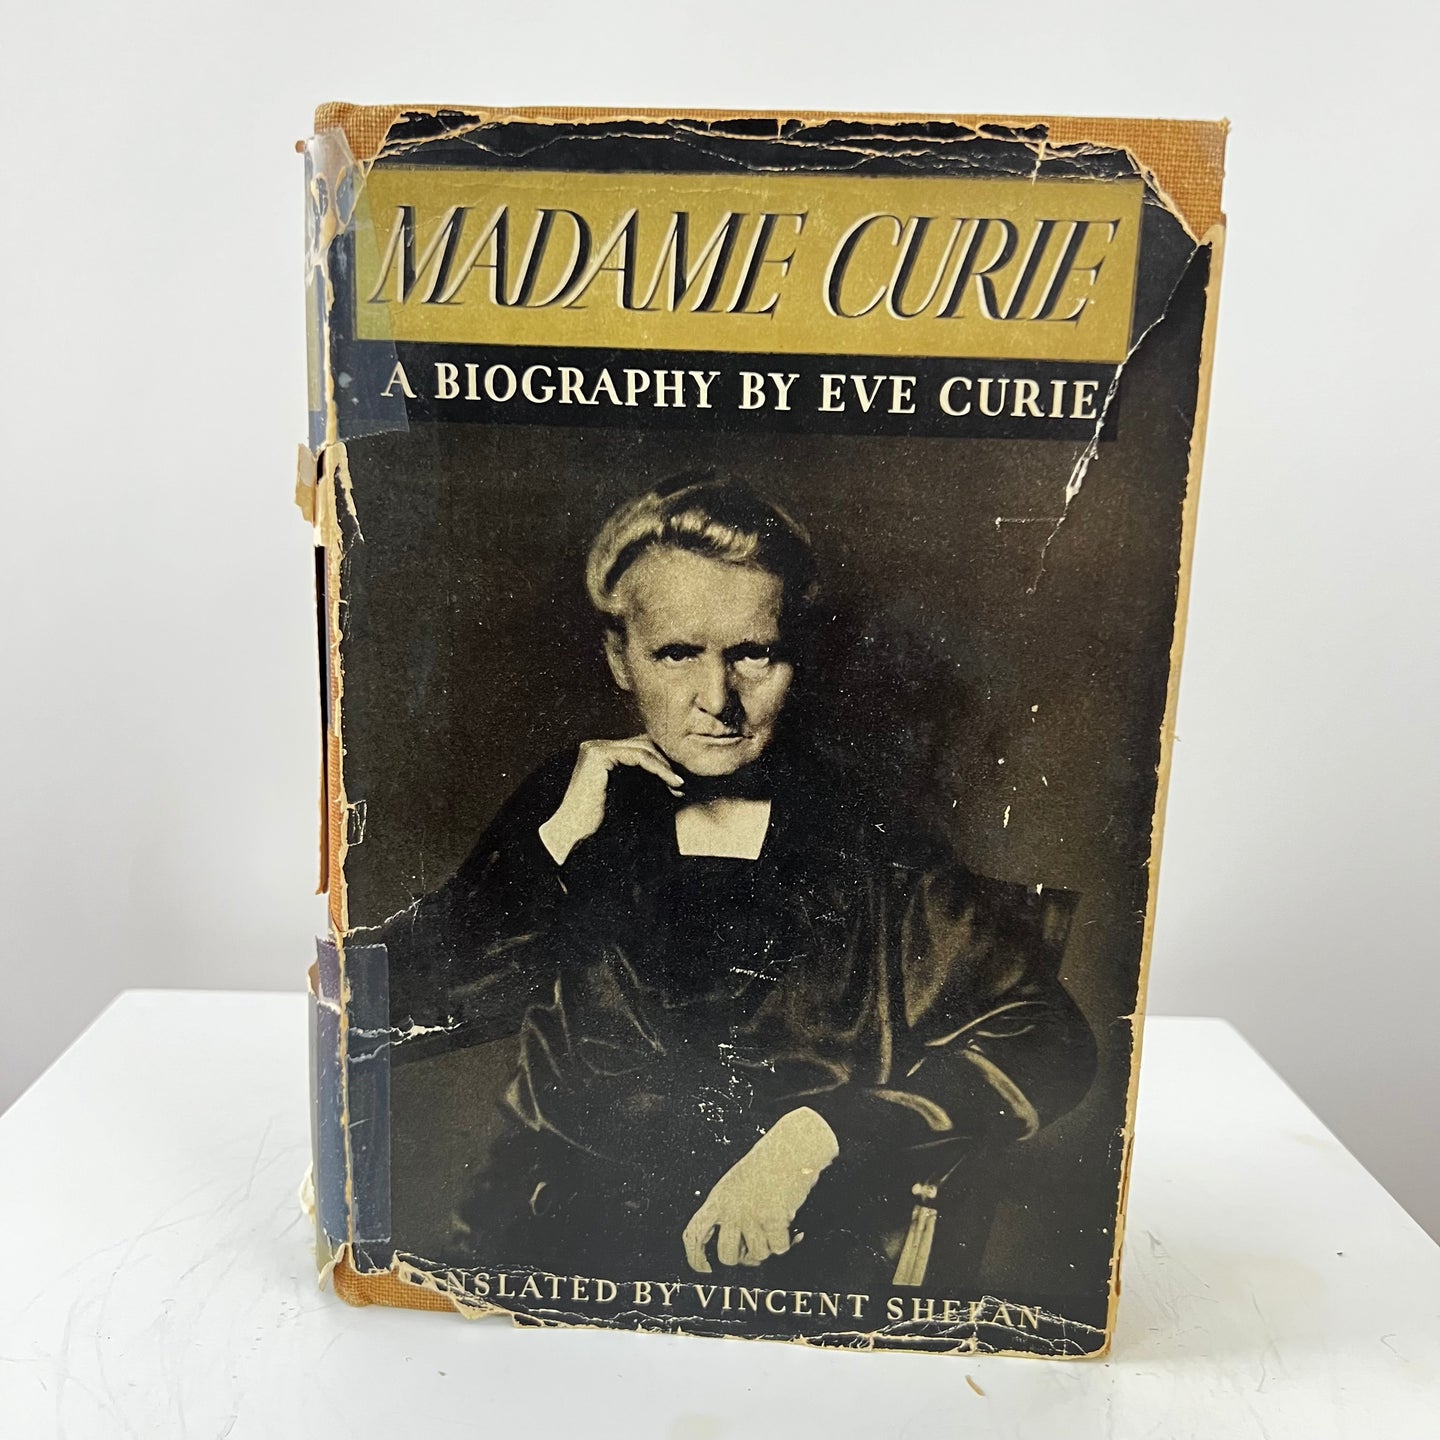 Madame Curie a Biography by Eve Curie